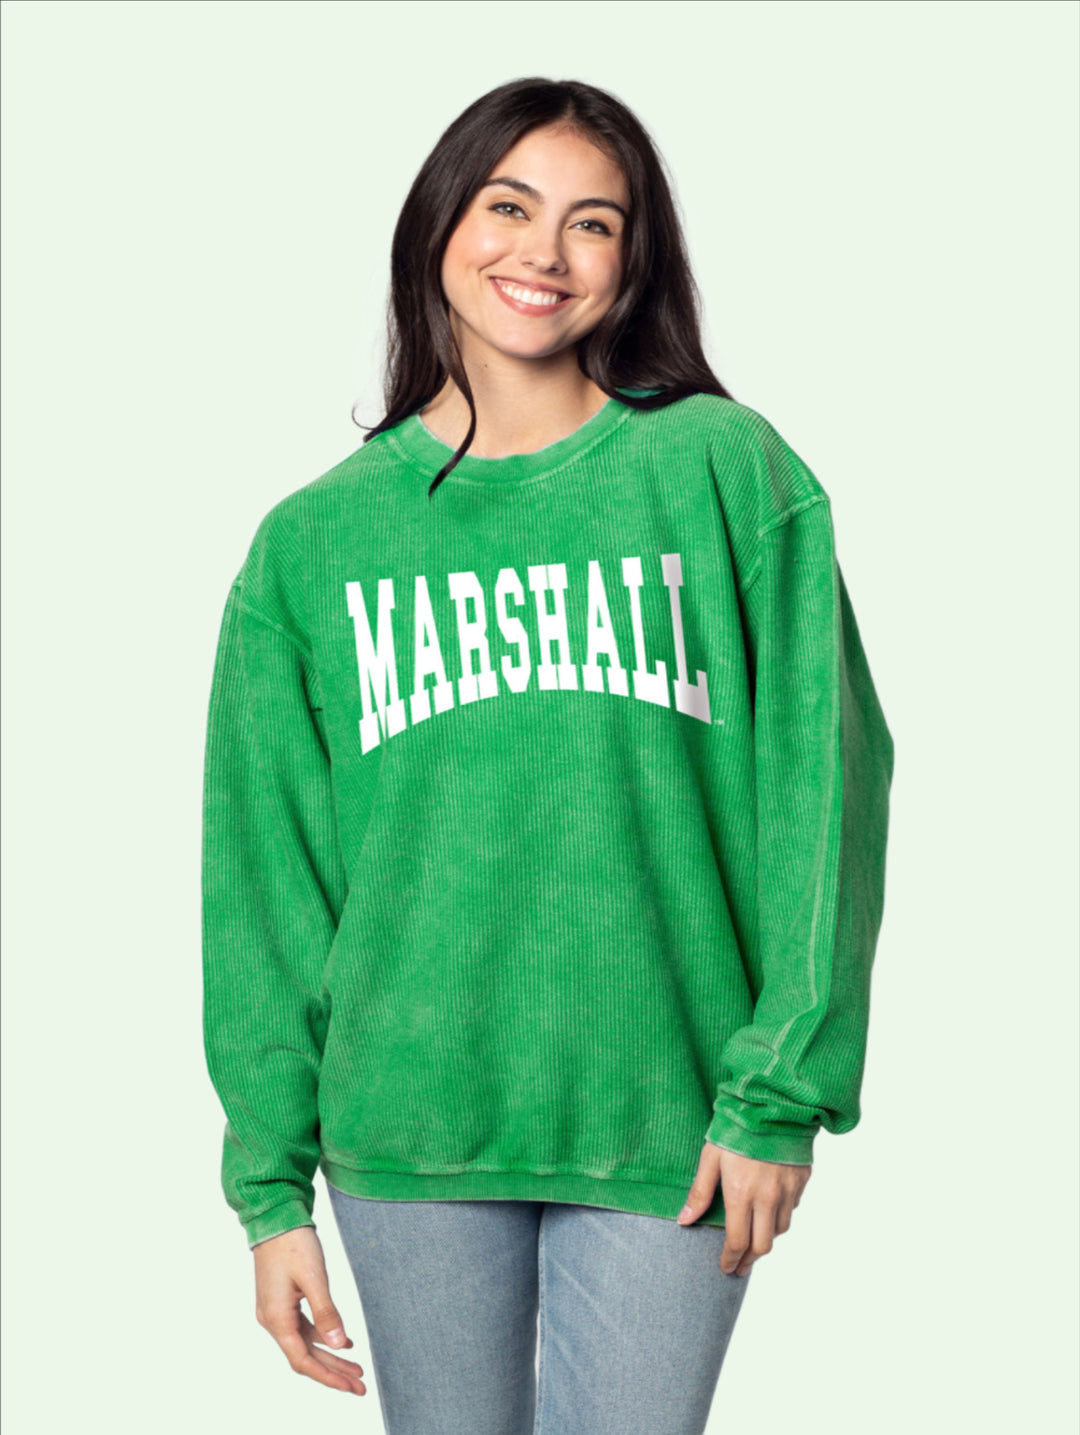 A dark haired model stands facing the camera in a kelly green corded fabric pullover jersey with Marshall in curved letters on the front.